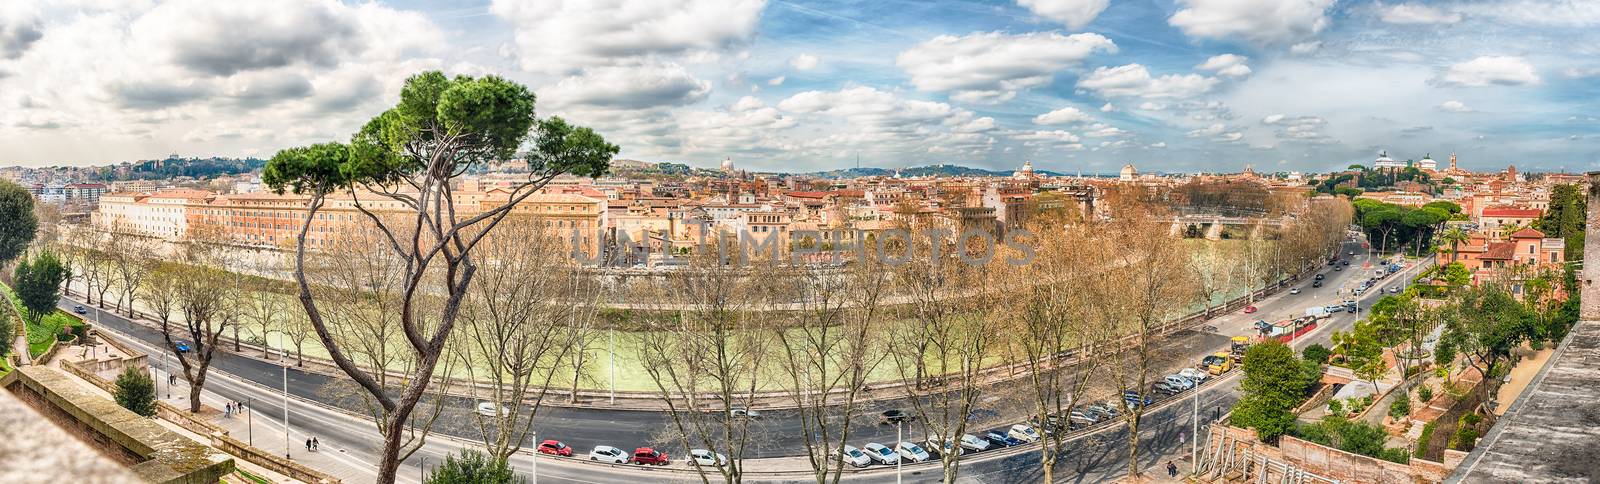 Panoramic view from Aventine Hill in Rome, Italy by marcorubino